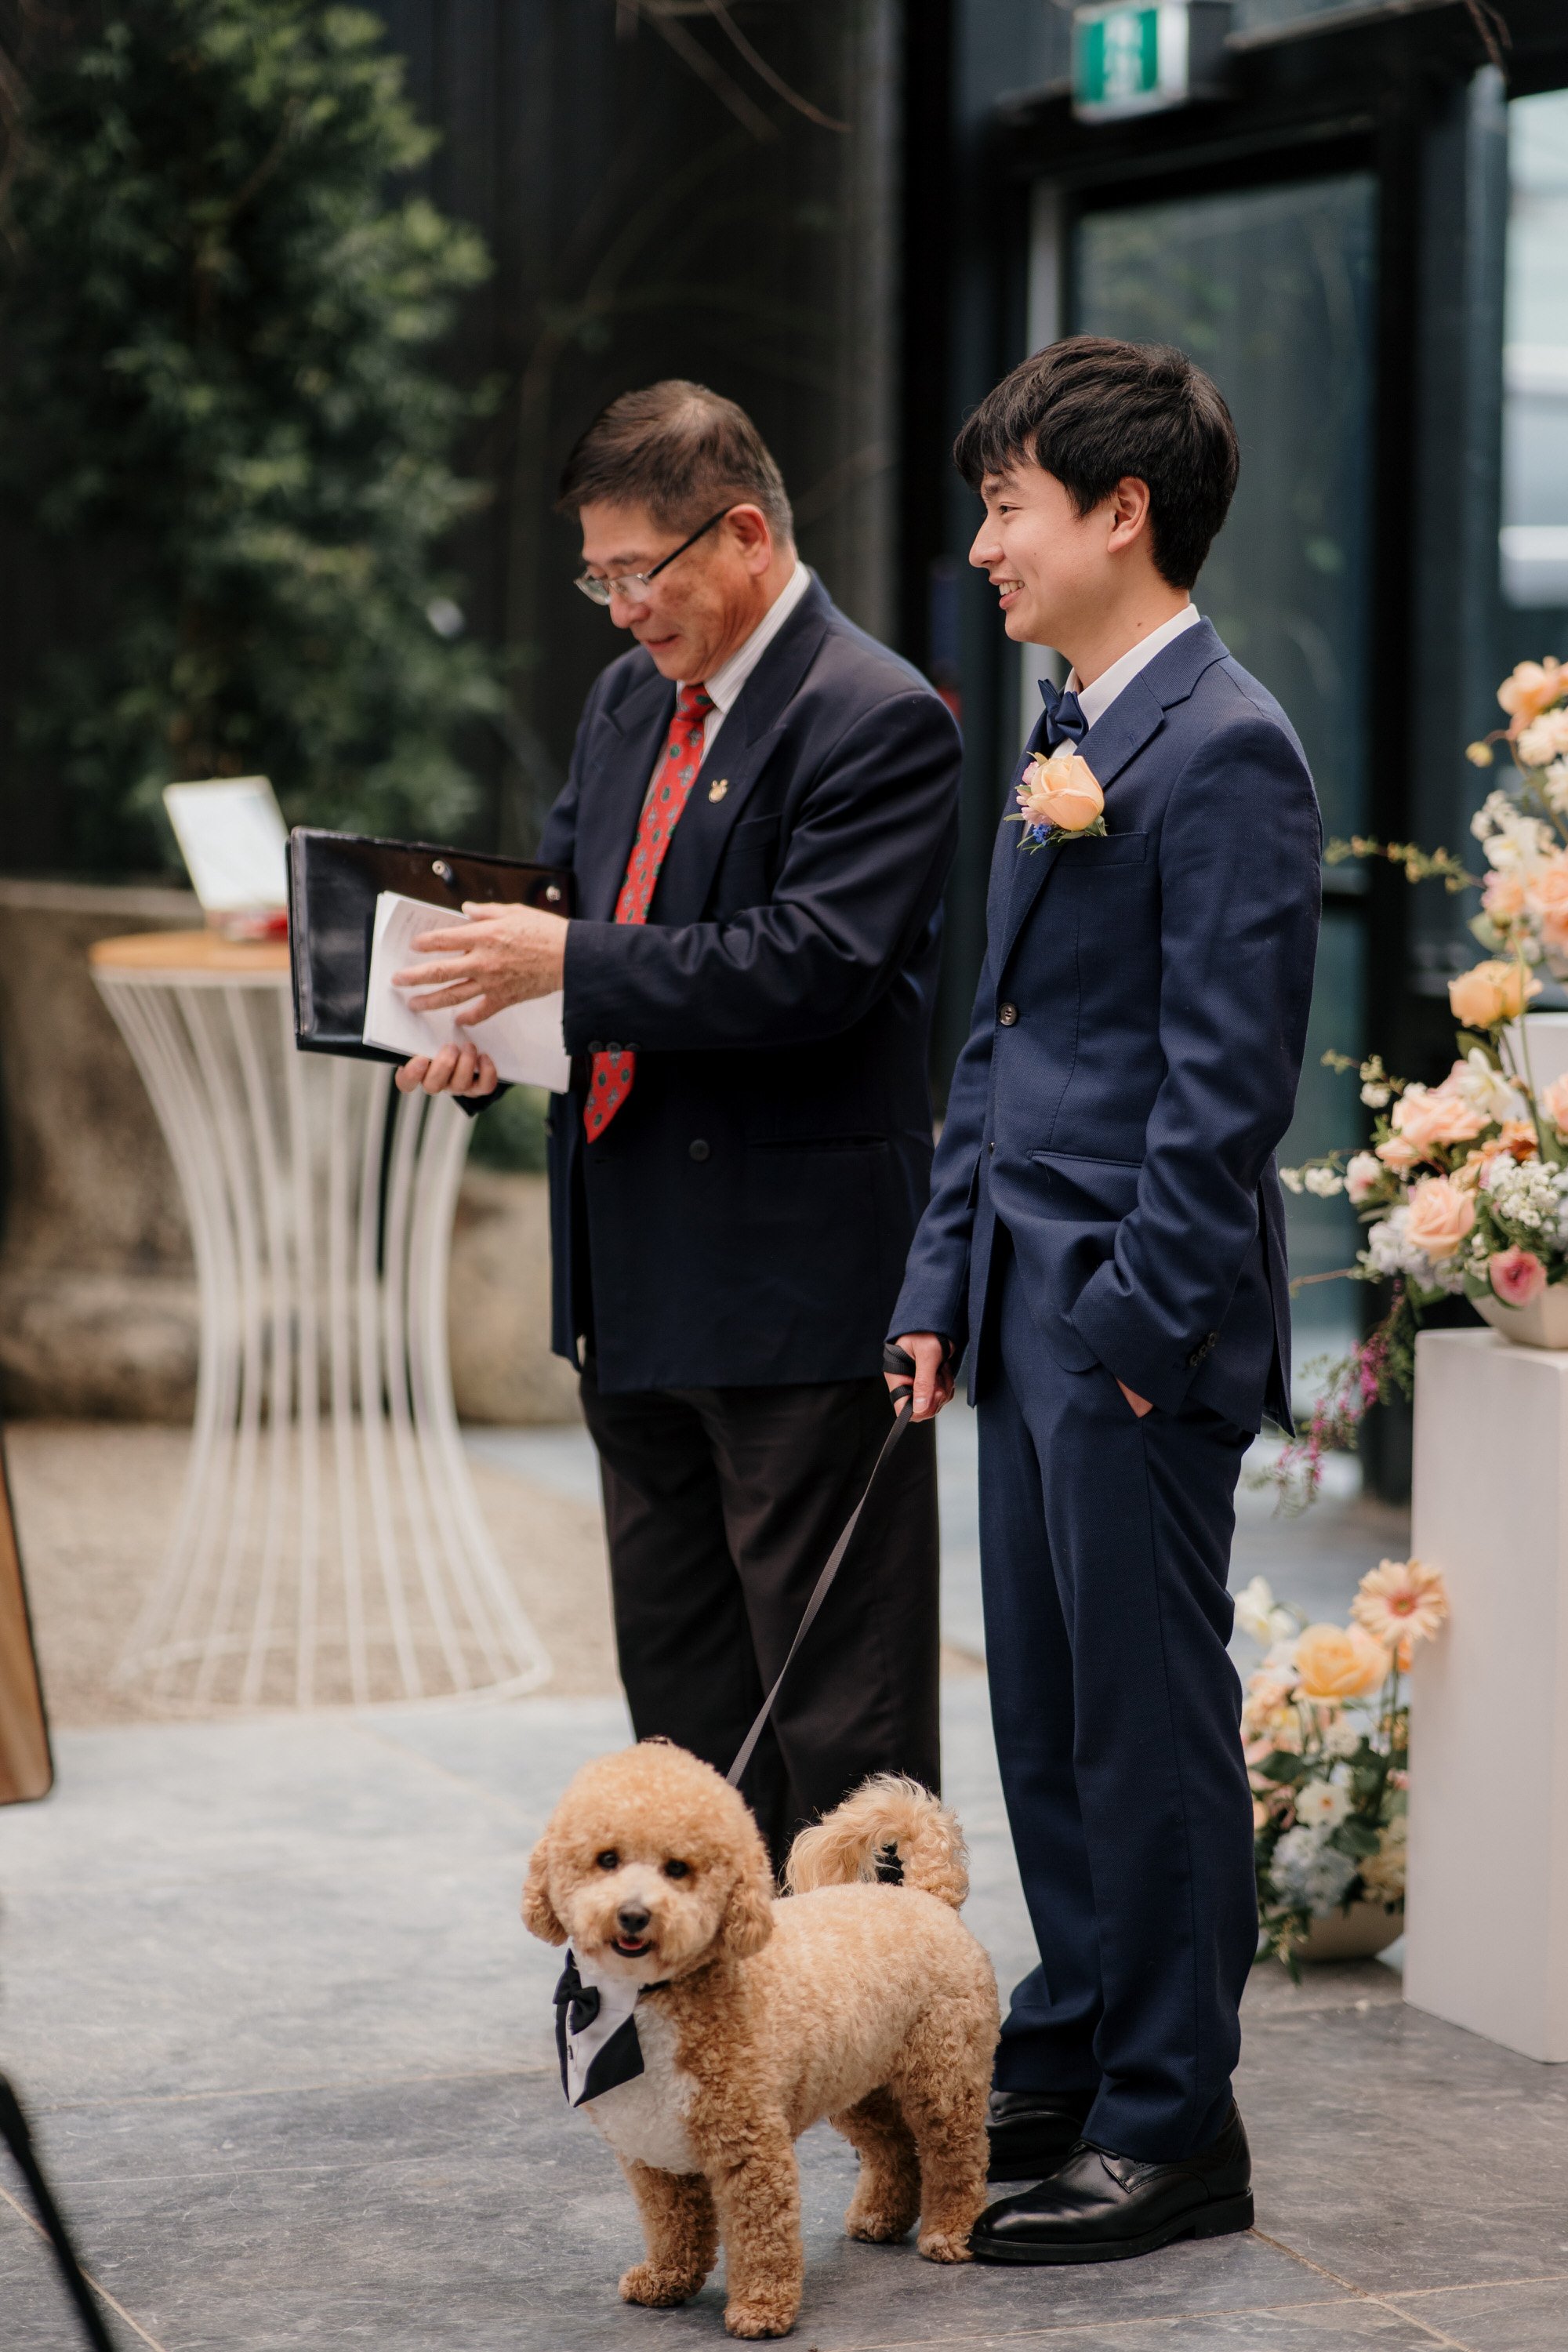 glasshouse-morningside-top-auckland-wedding-phtographer-2023-photography-videography-film-new-zealand-NZ-best-urban-venue-traditional-chinese-ceremony-spring-colourful-pet-dog-dear-white-production (28).jpg